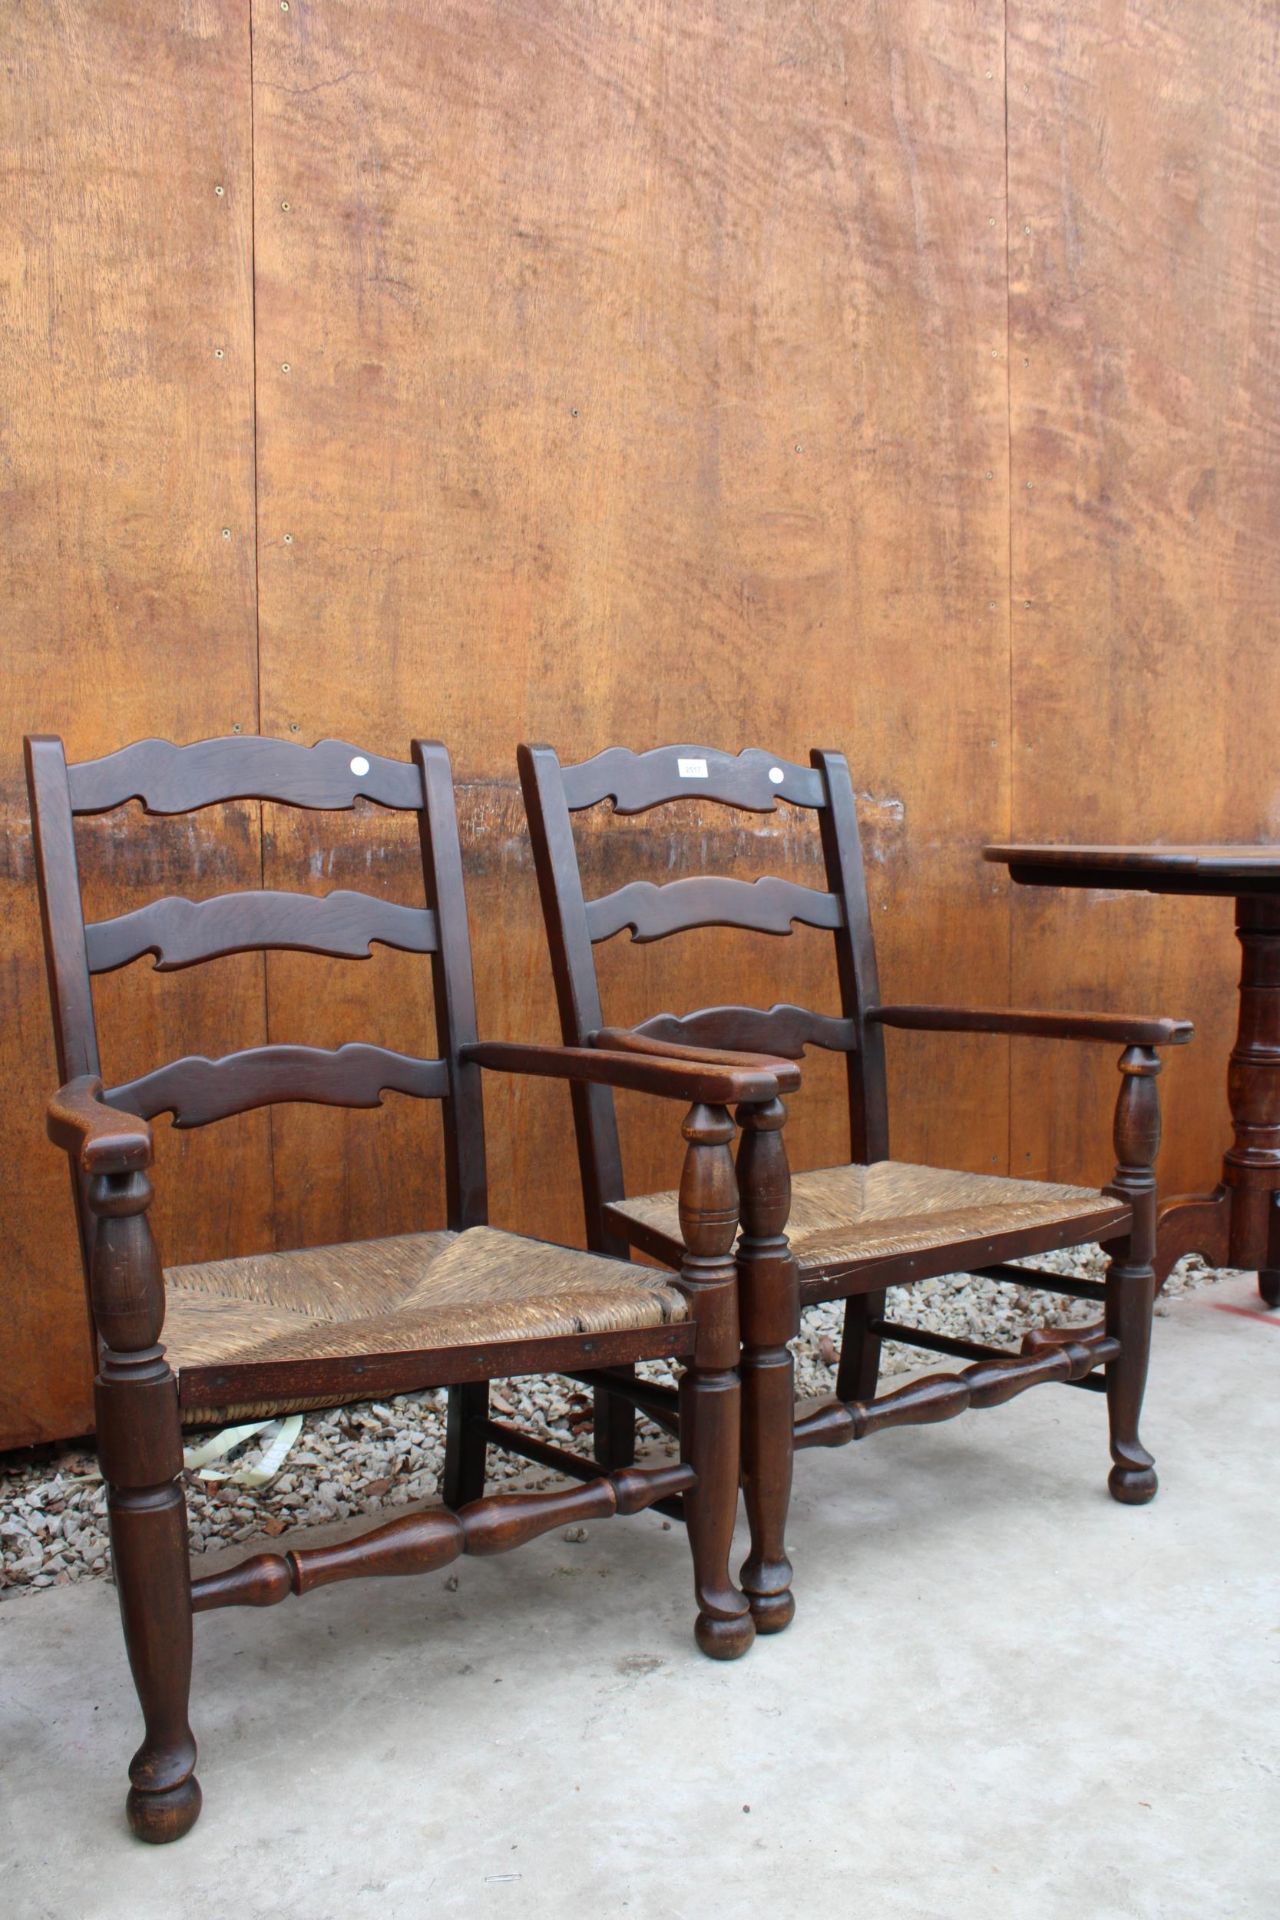 A PAIR OF 18TH CENTURY STYLE LOW OAK LADDER-BACK ELBOW CHAIRS WITH RUSH SEATS - Image 2 of 3